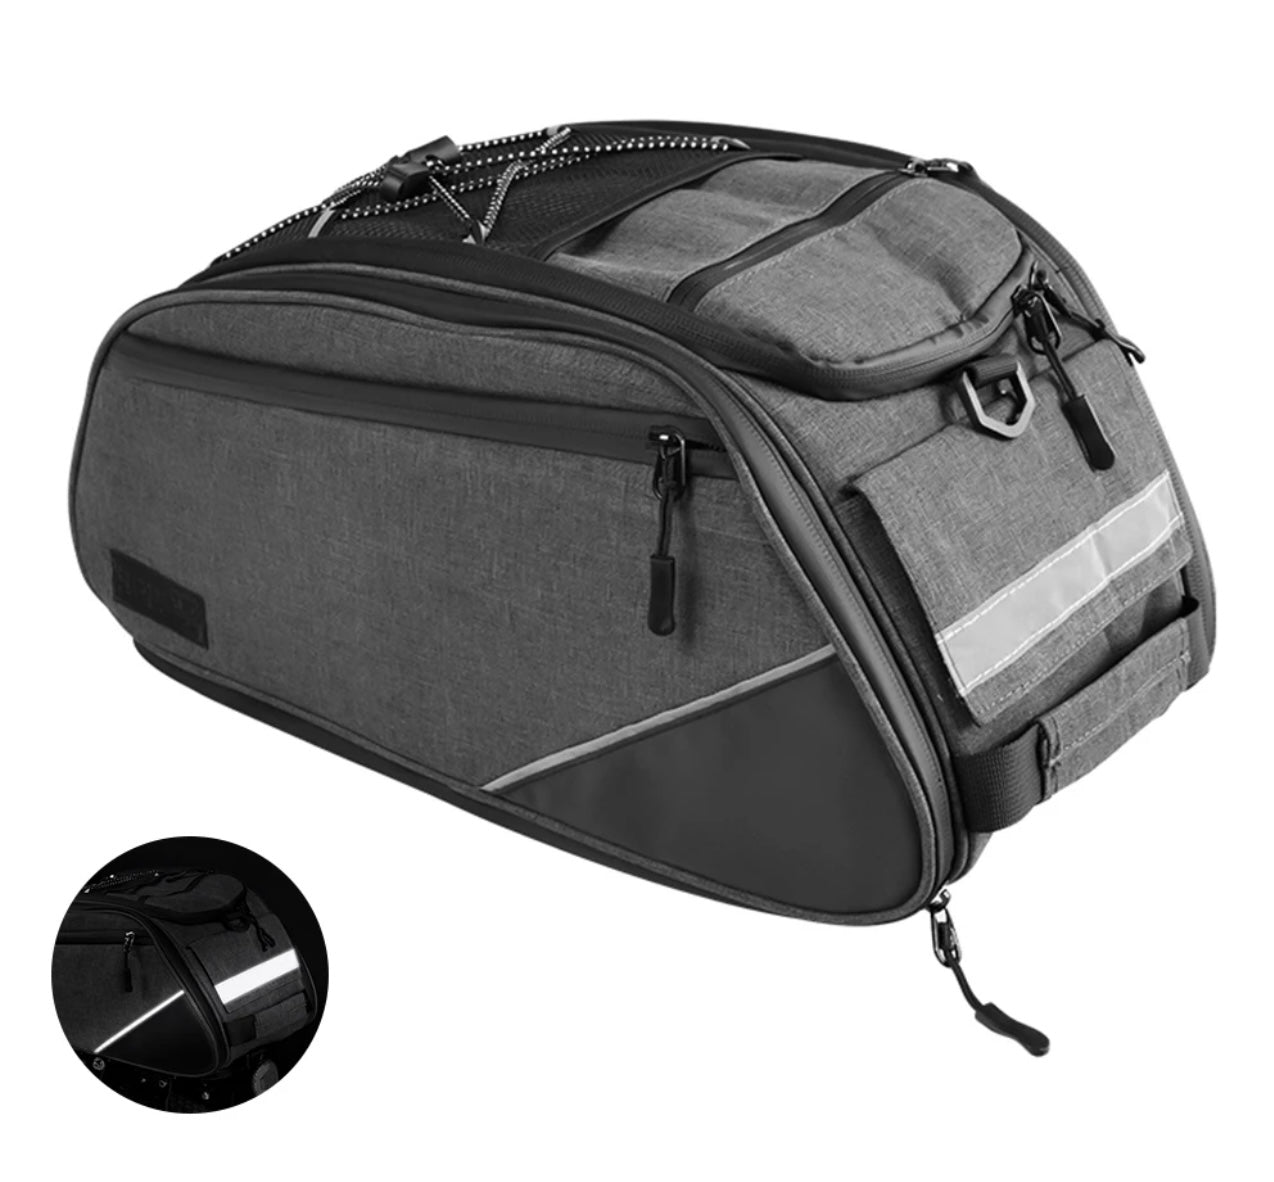 Mason James rear rack bag, insulated / cooler for bike, ebike, shoulder strap, easy to get on and off bicycle and carry, pack your picnic basket! Quality and affordable!!